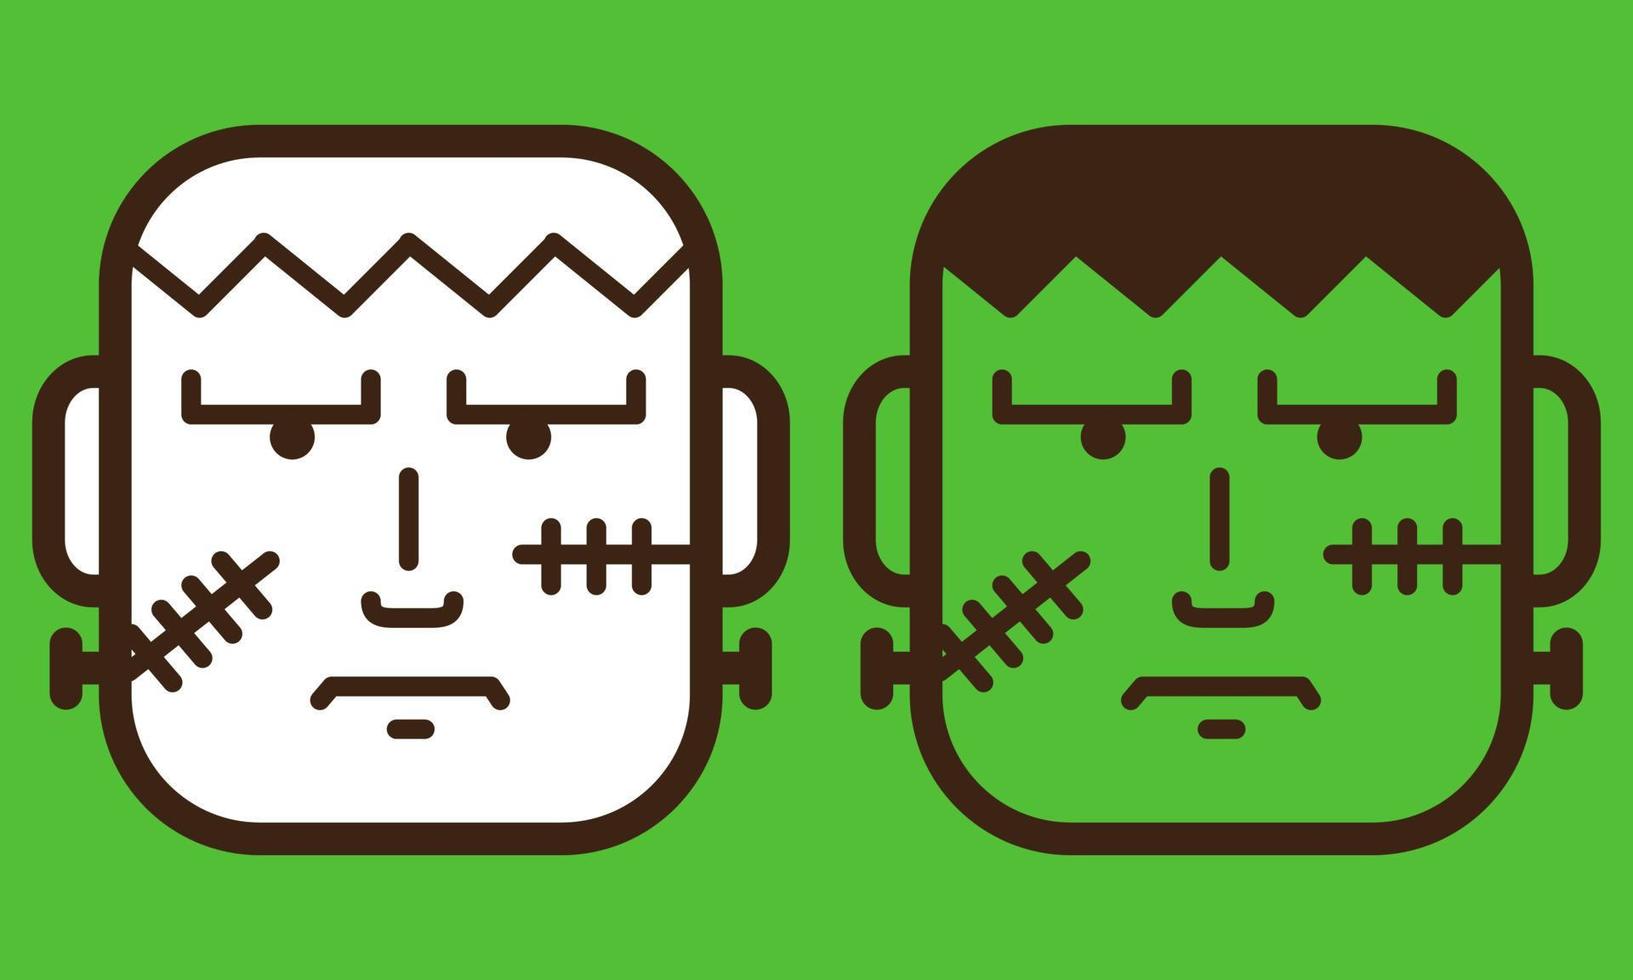 Frankenstein Head in Cartoon Style. Suitable to use as children mask and fit to place on t-shirt design, mug and other merchandise when Halloween event. vector